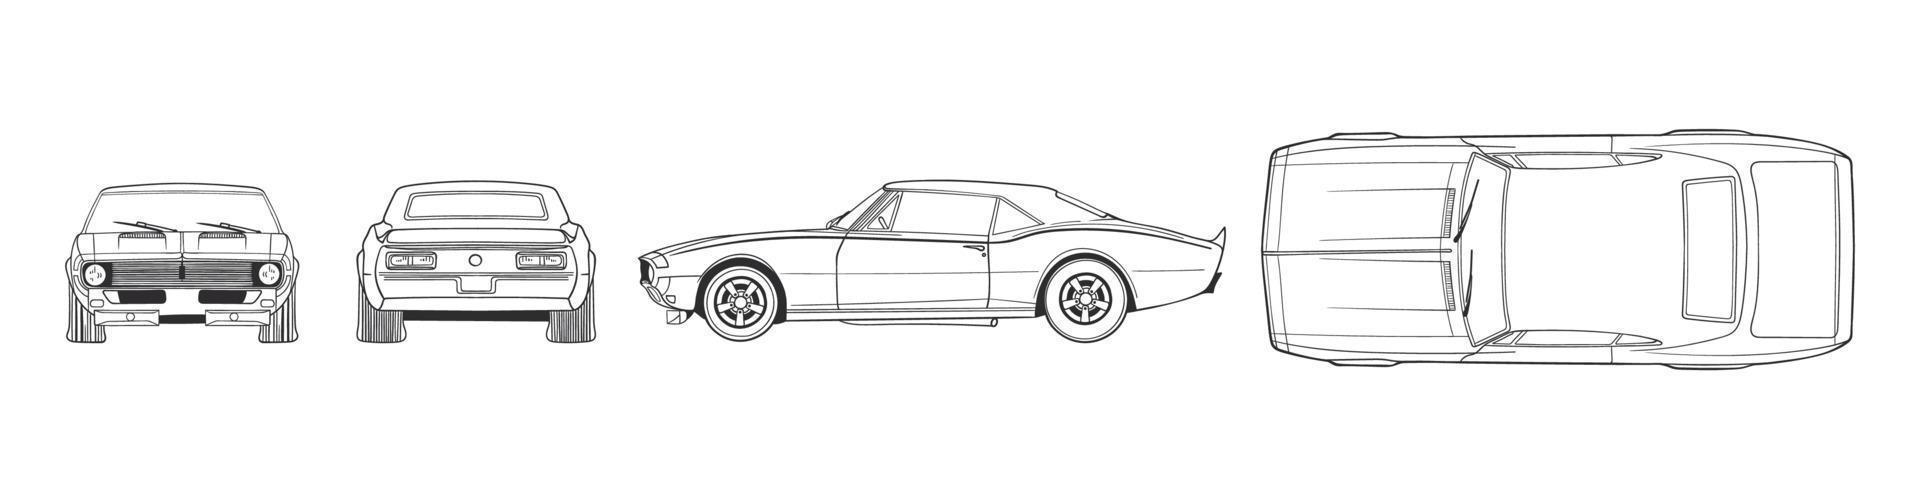 https://static.vecteezy.com/system/resources/previews/016/185/170/non_2x/retro-sport-car-hand-drawn-car-front-back-top-and-side-view-illustration-vector.jpg